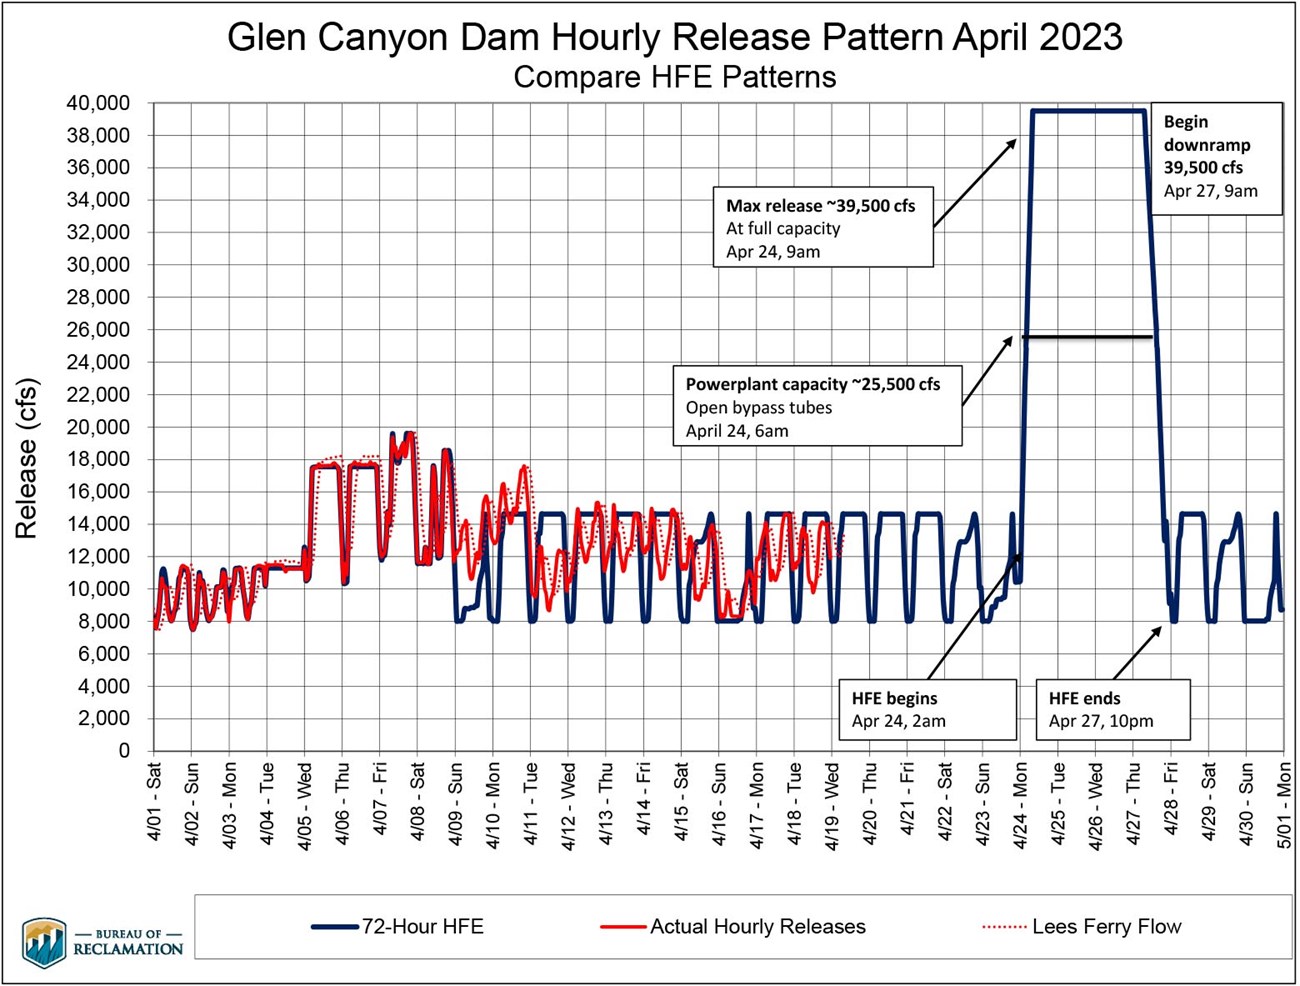 Chart: Detailing the release pattern for Glen Canyon Dam's High Flow Experiment